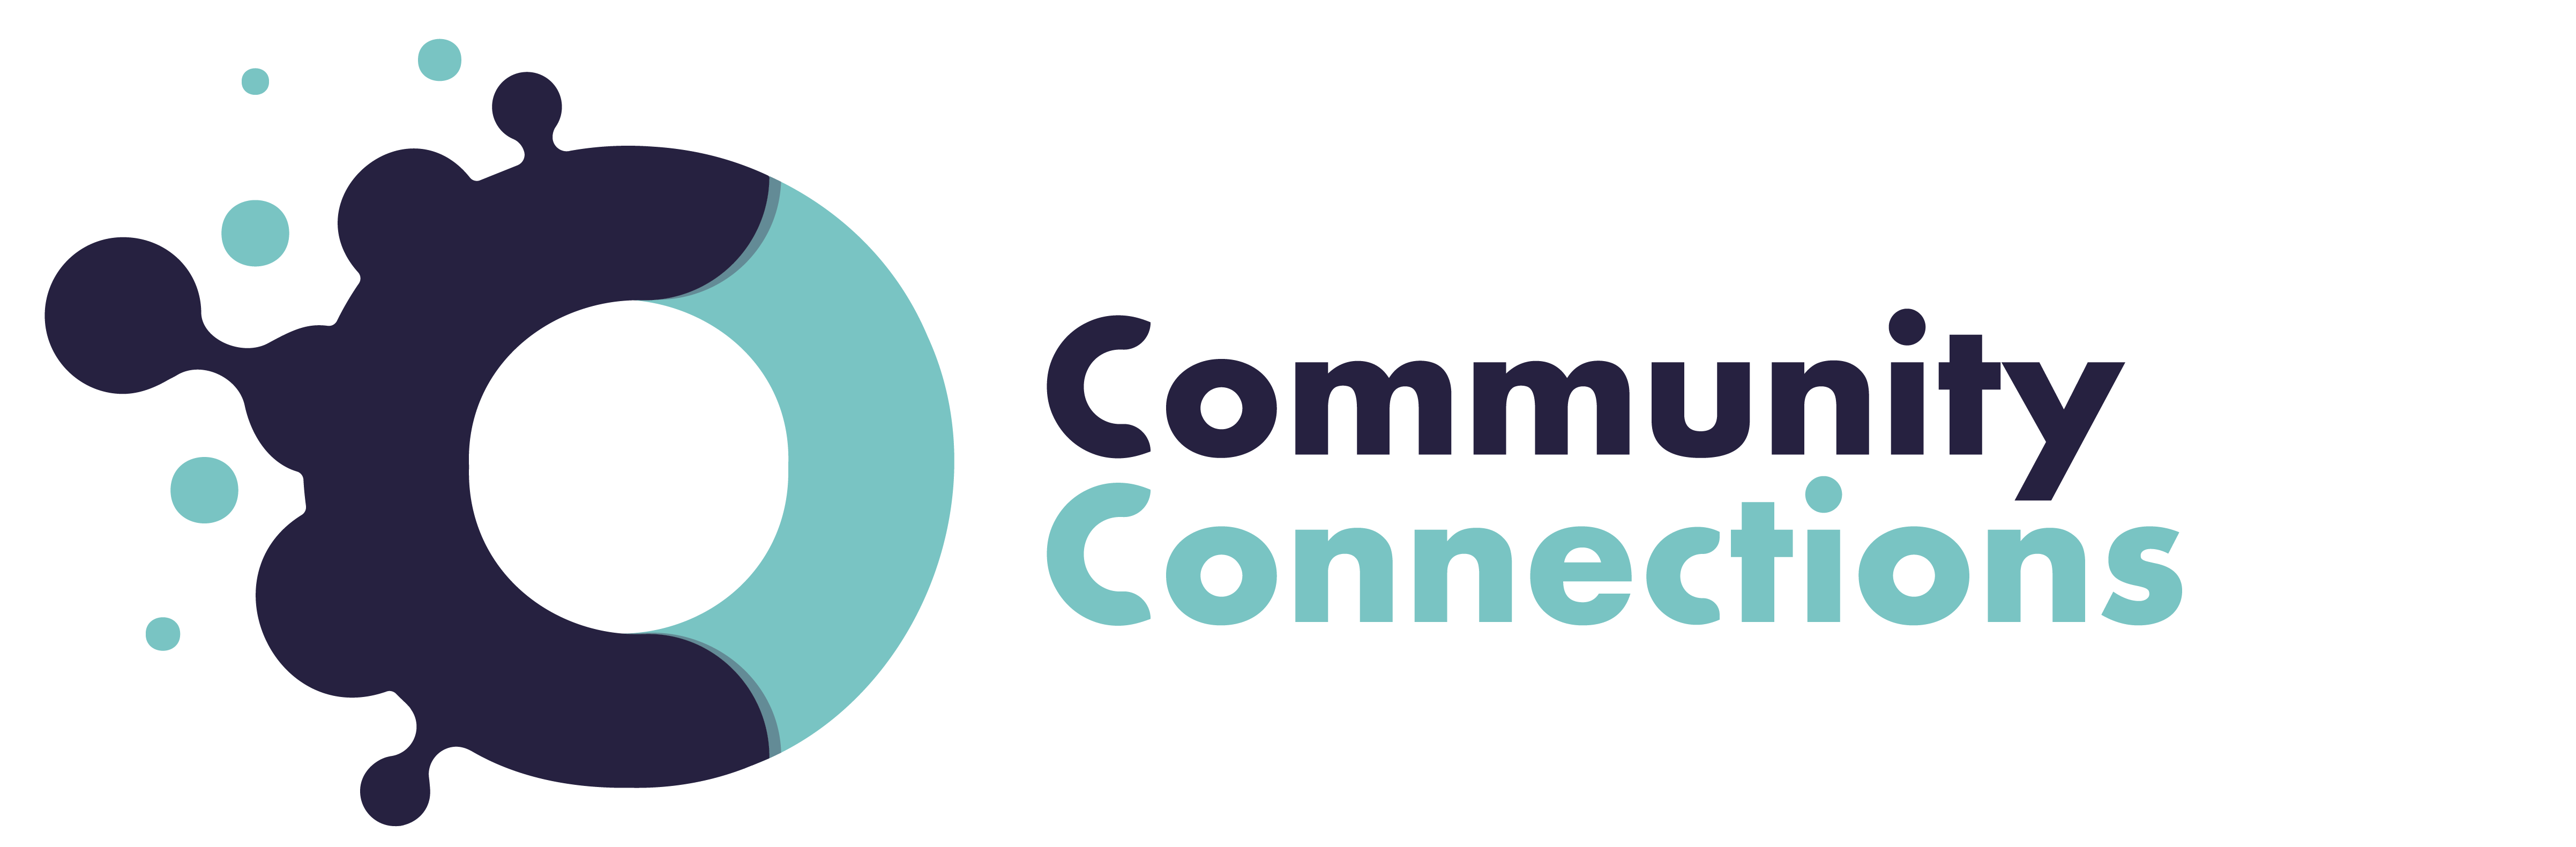 Our connections Community Connections